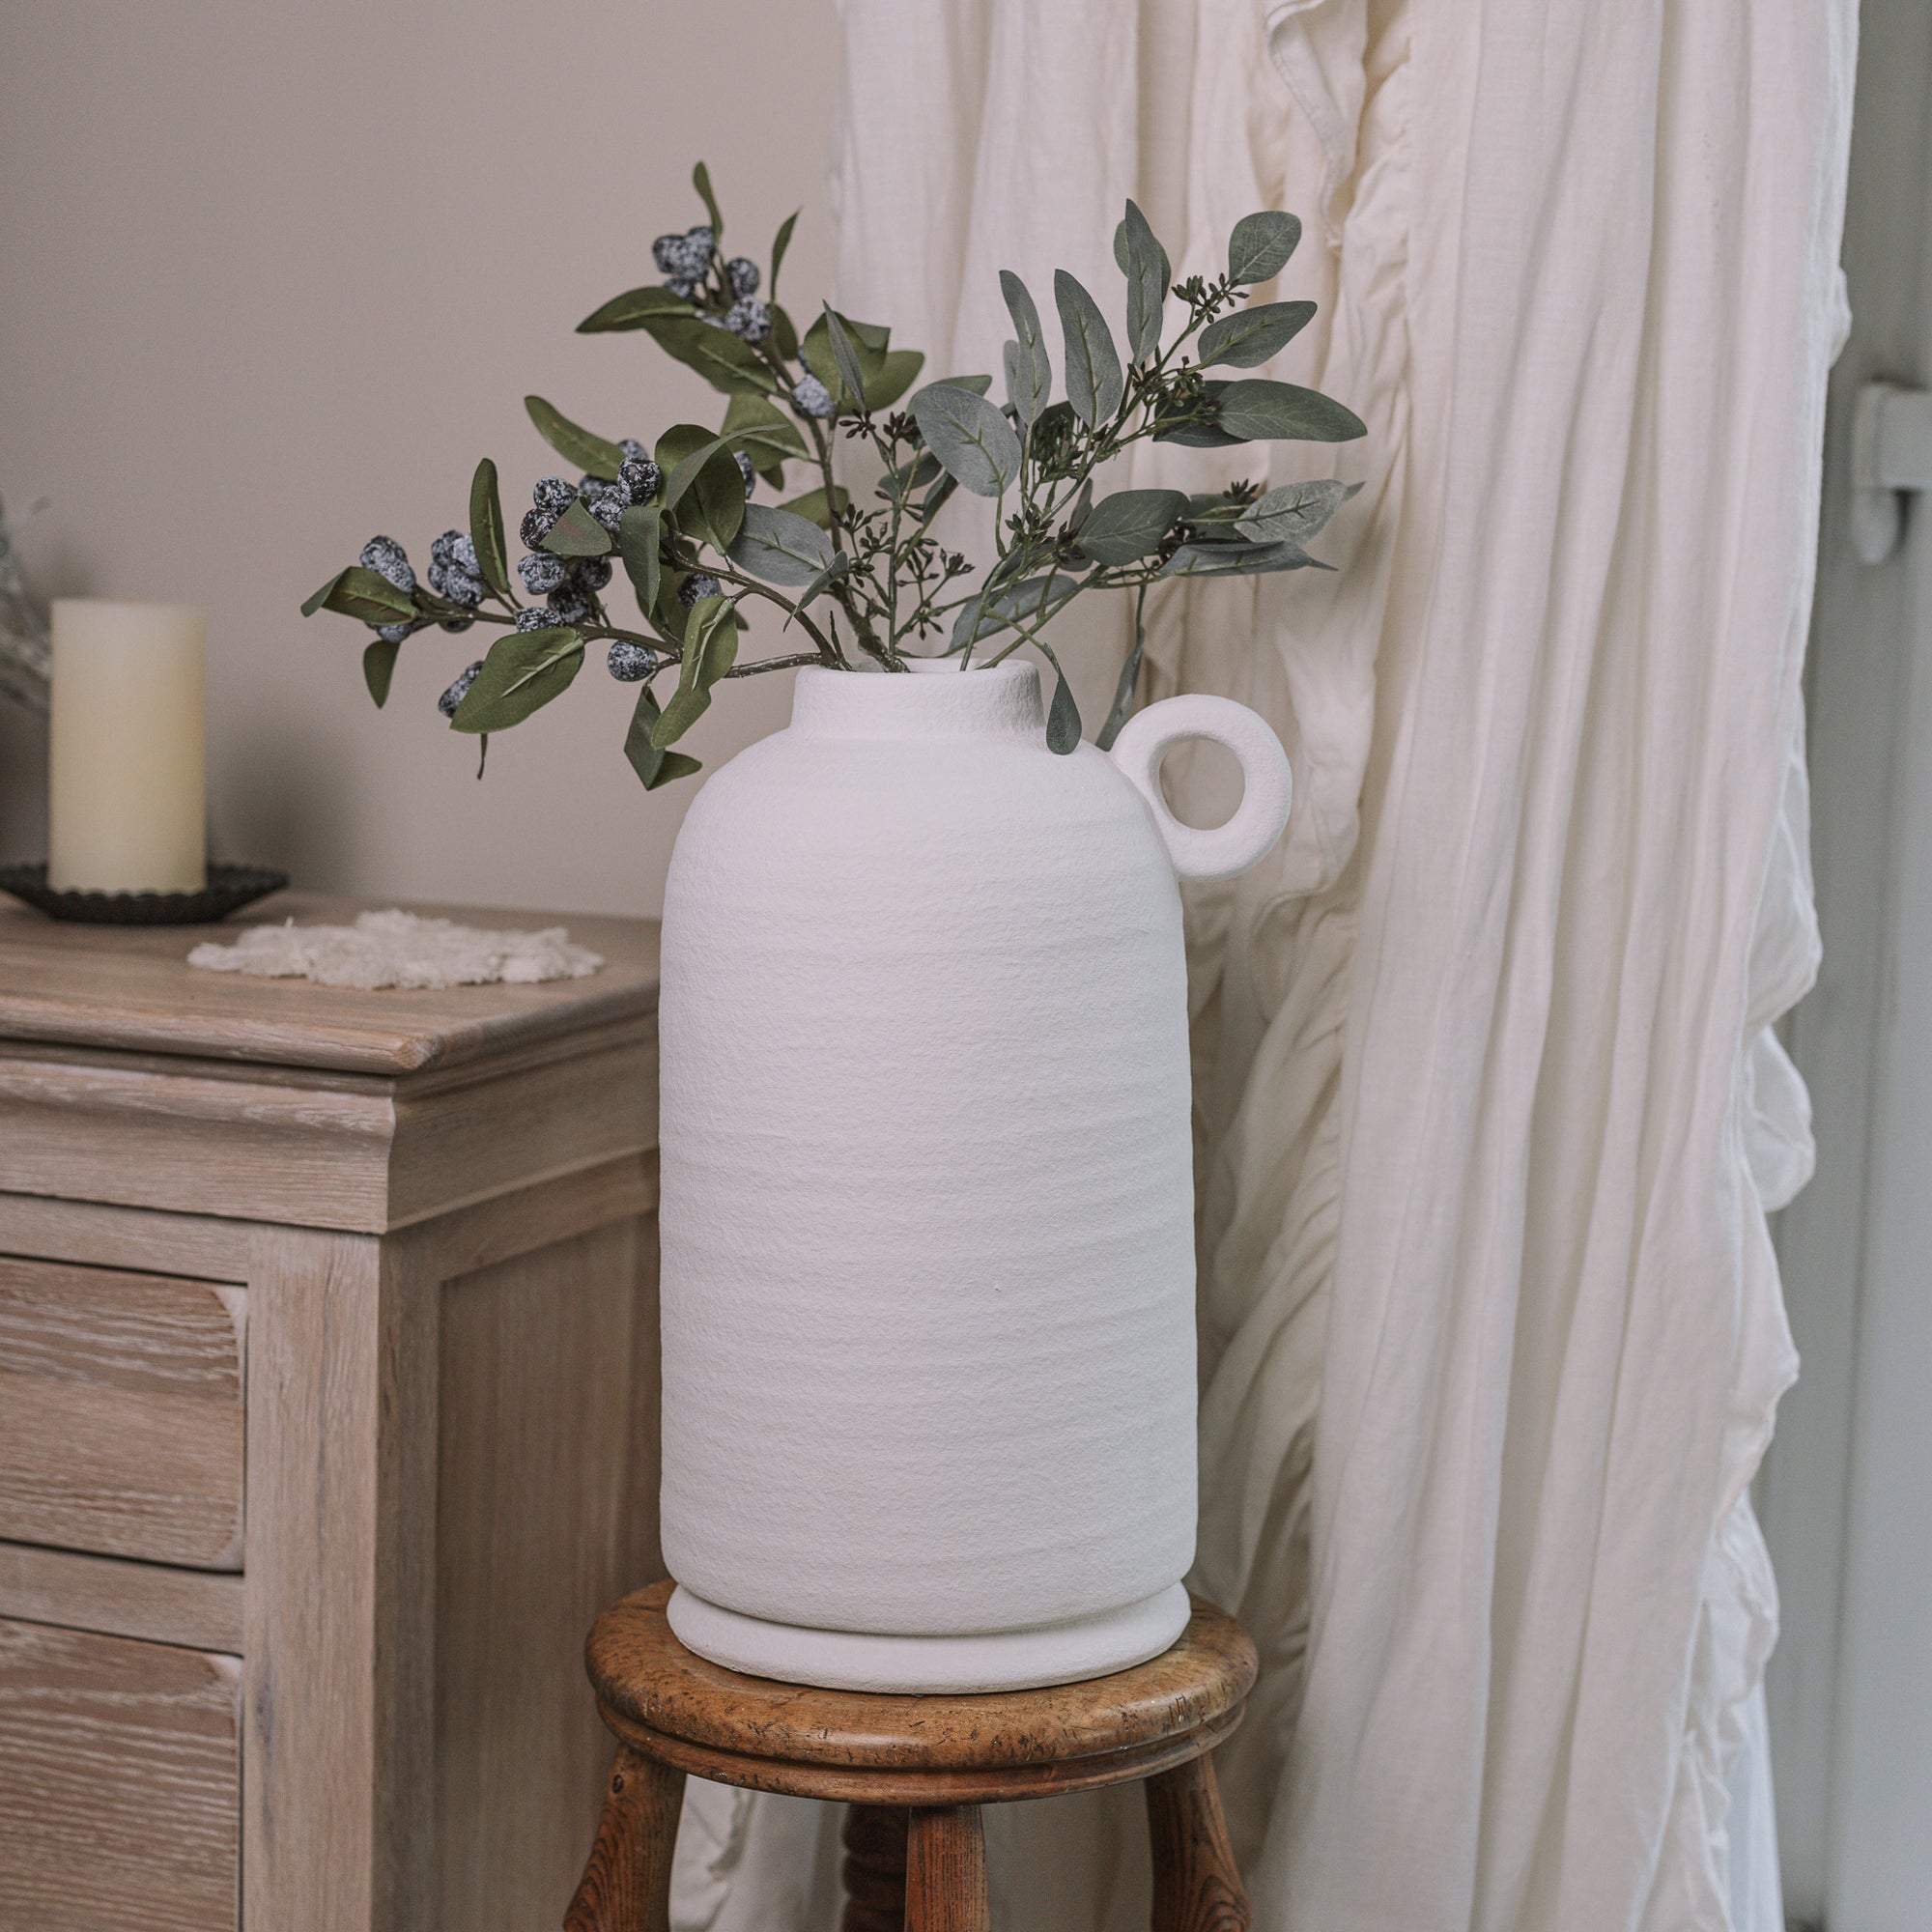 Textured White Vase with berry spray on wooden stool.